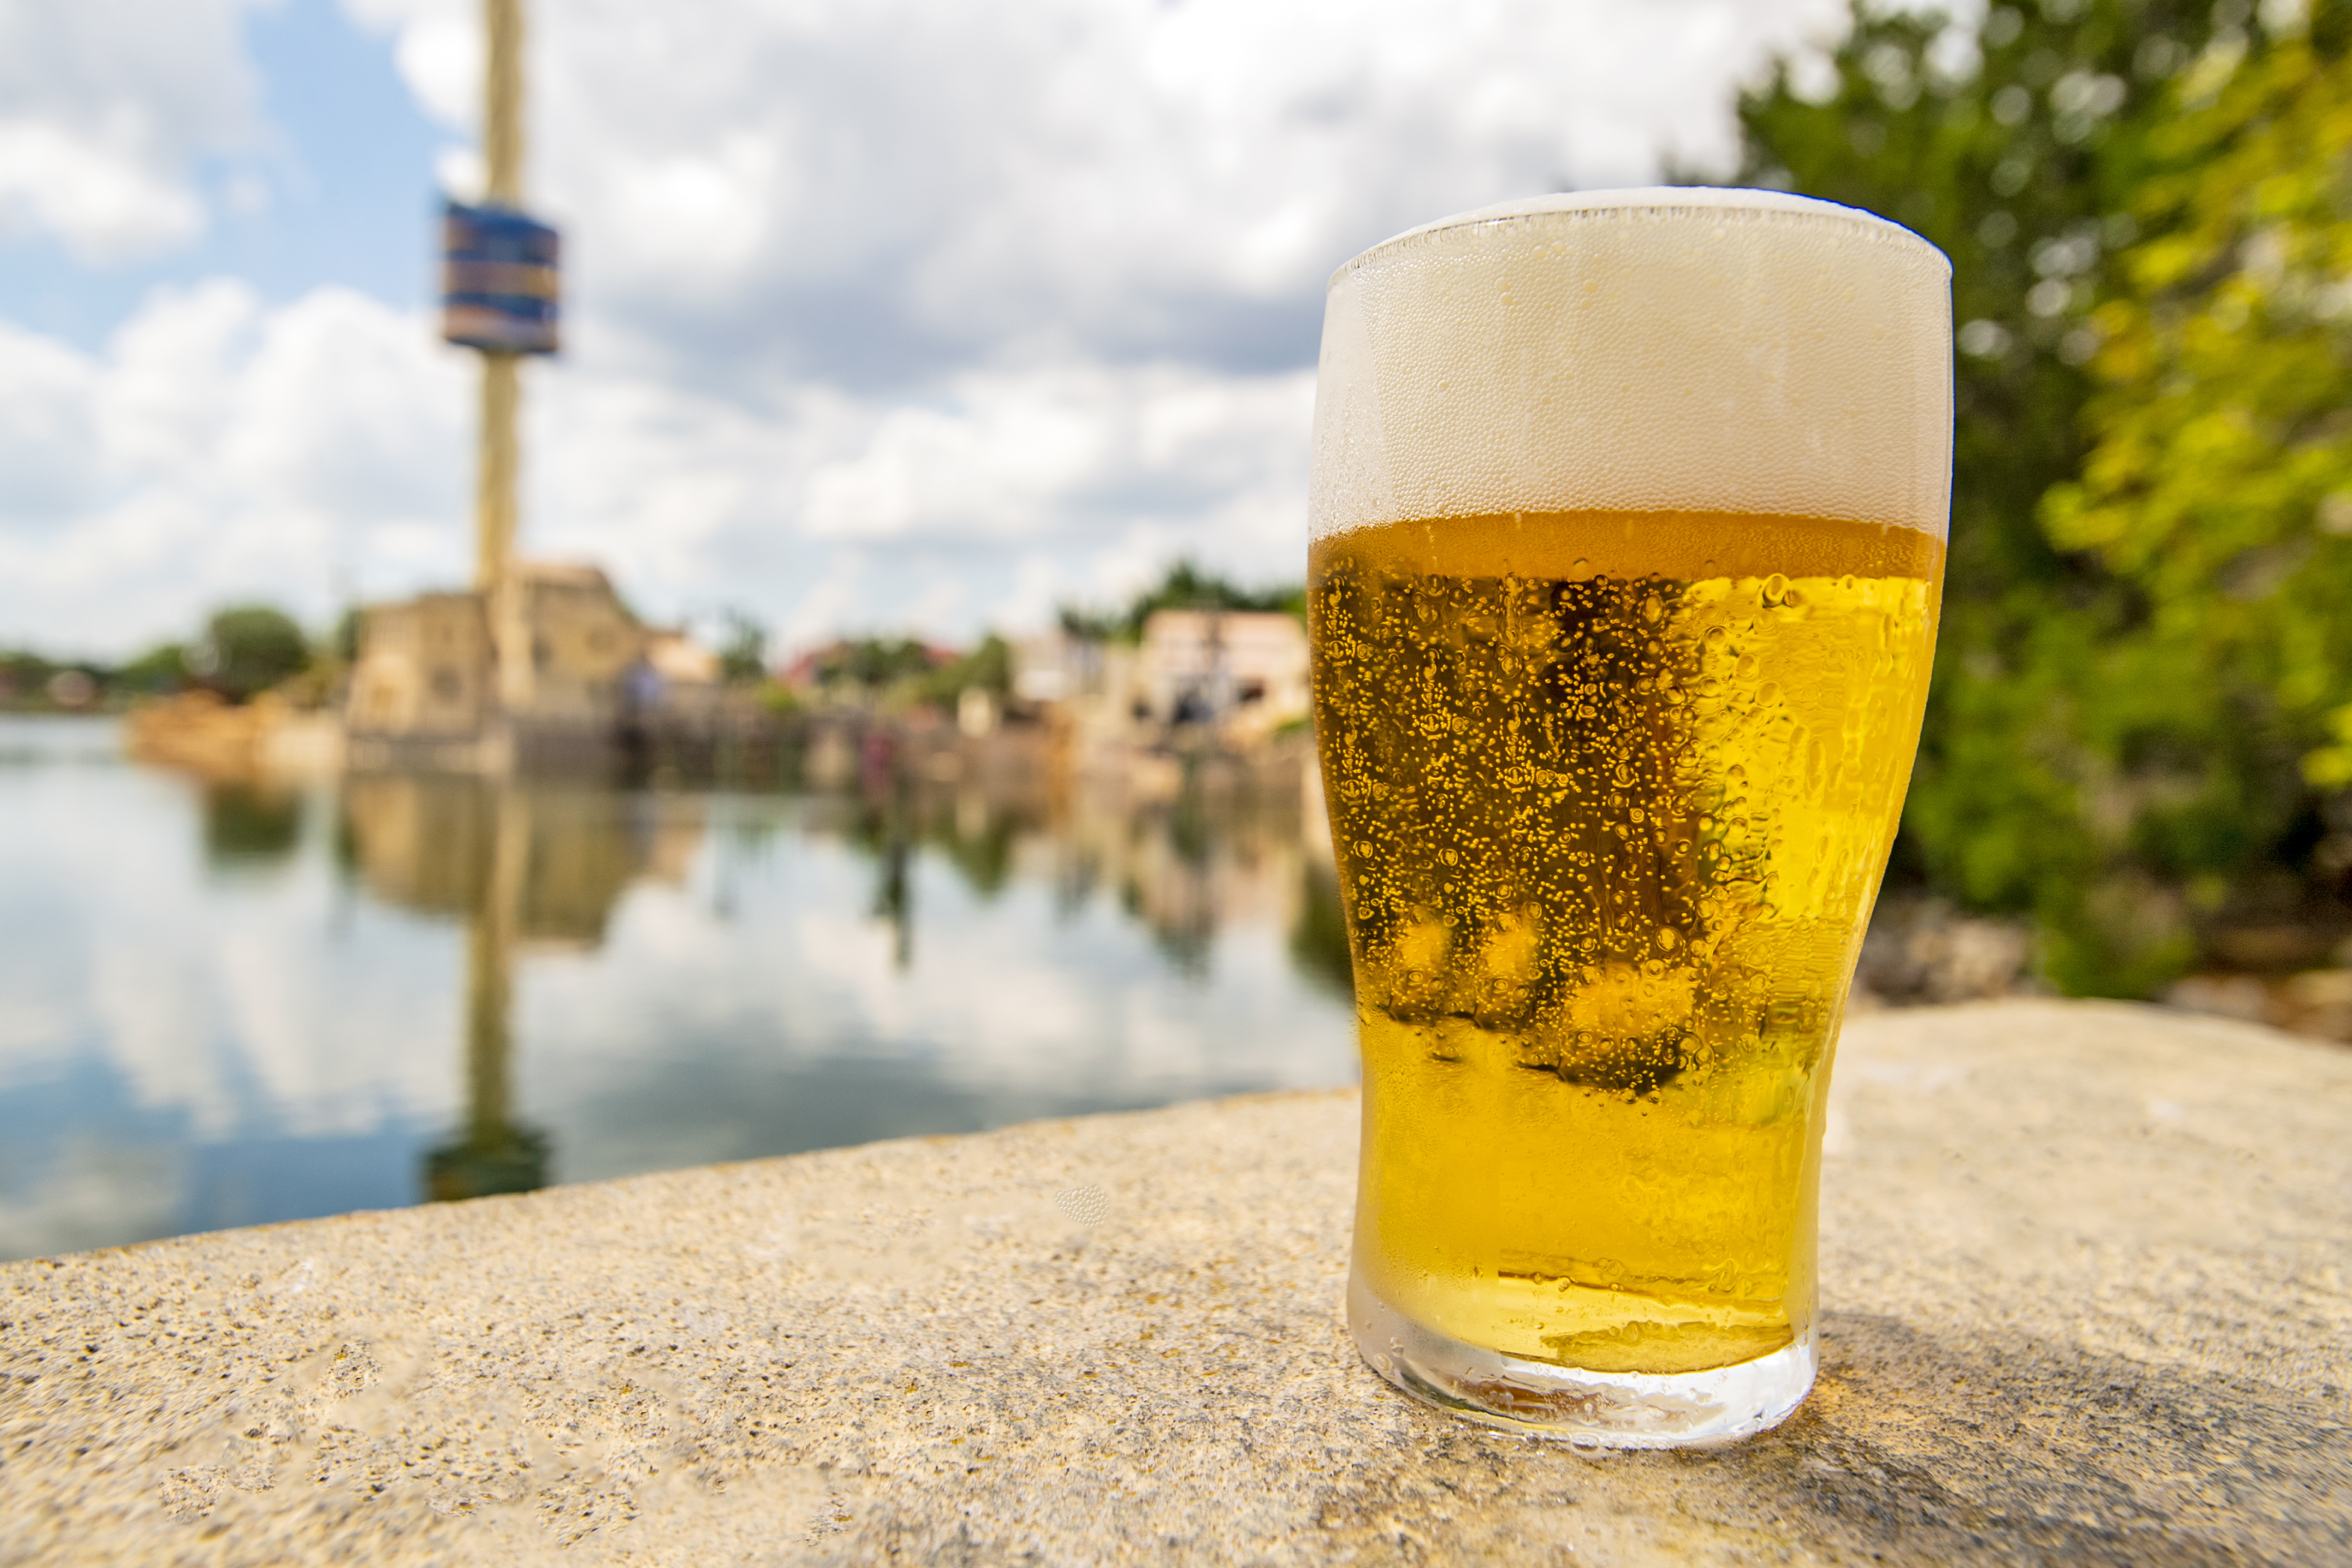 Free Beer is Back! Rotating Tap Beers are Free and Return this Summer to SeaWorld Orlando